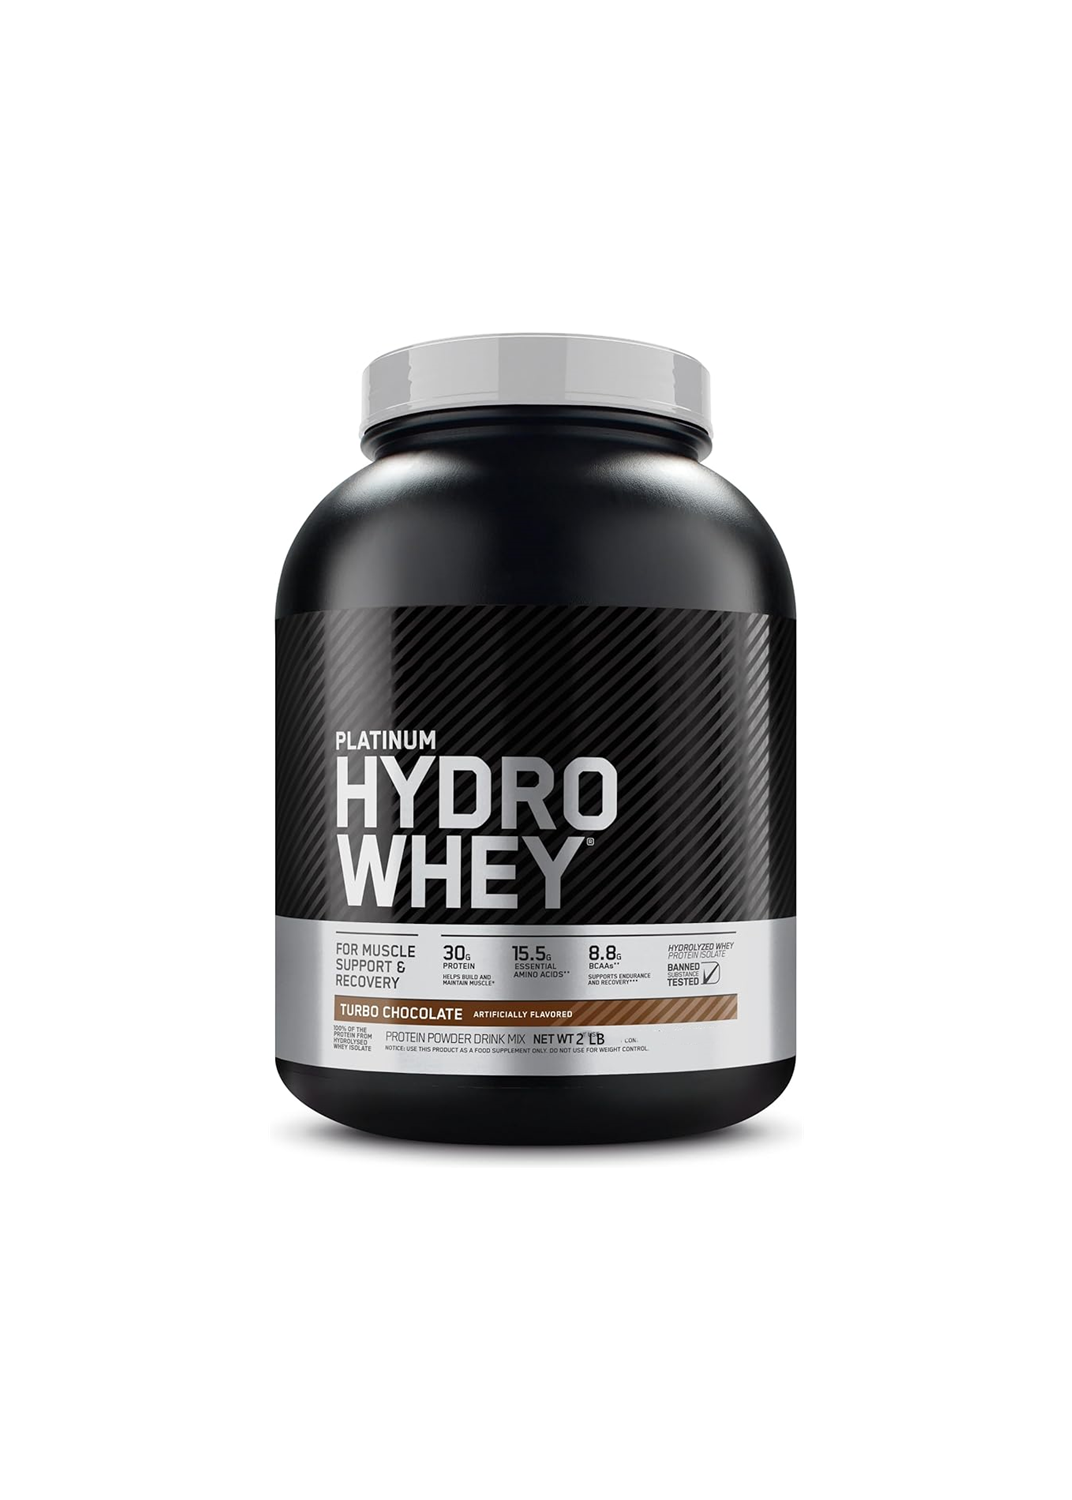 OEM Private Label Hydro whey protein powder 100% hydrolyze powder muscle supplement